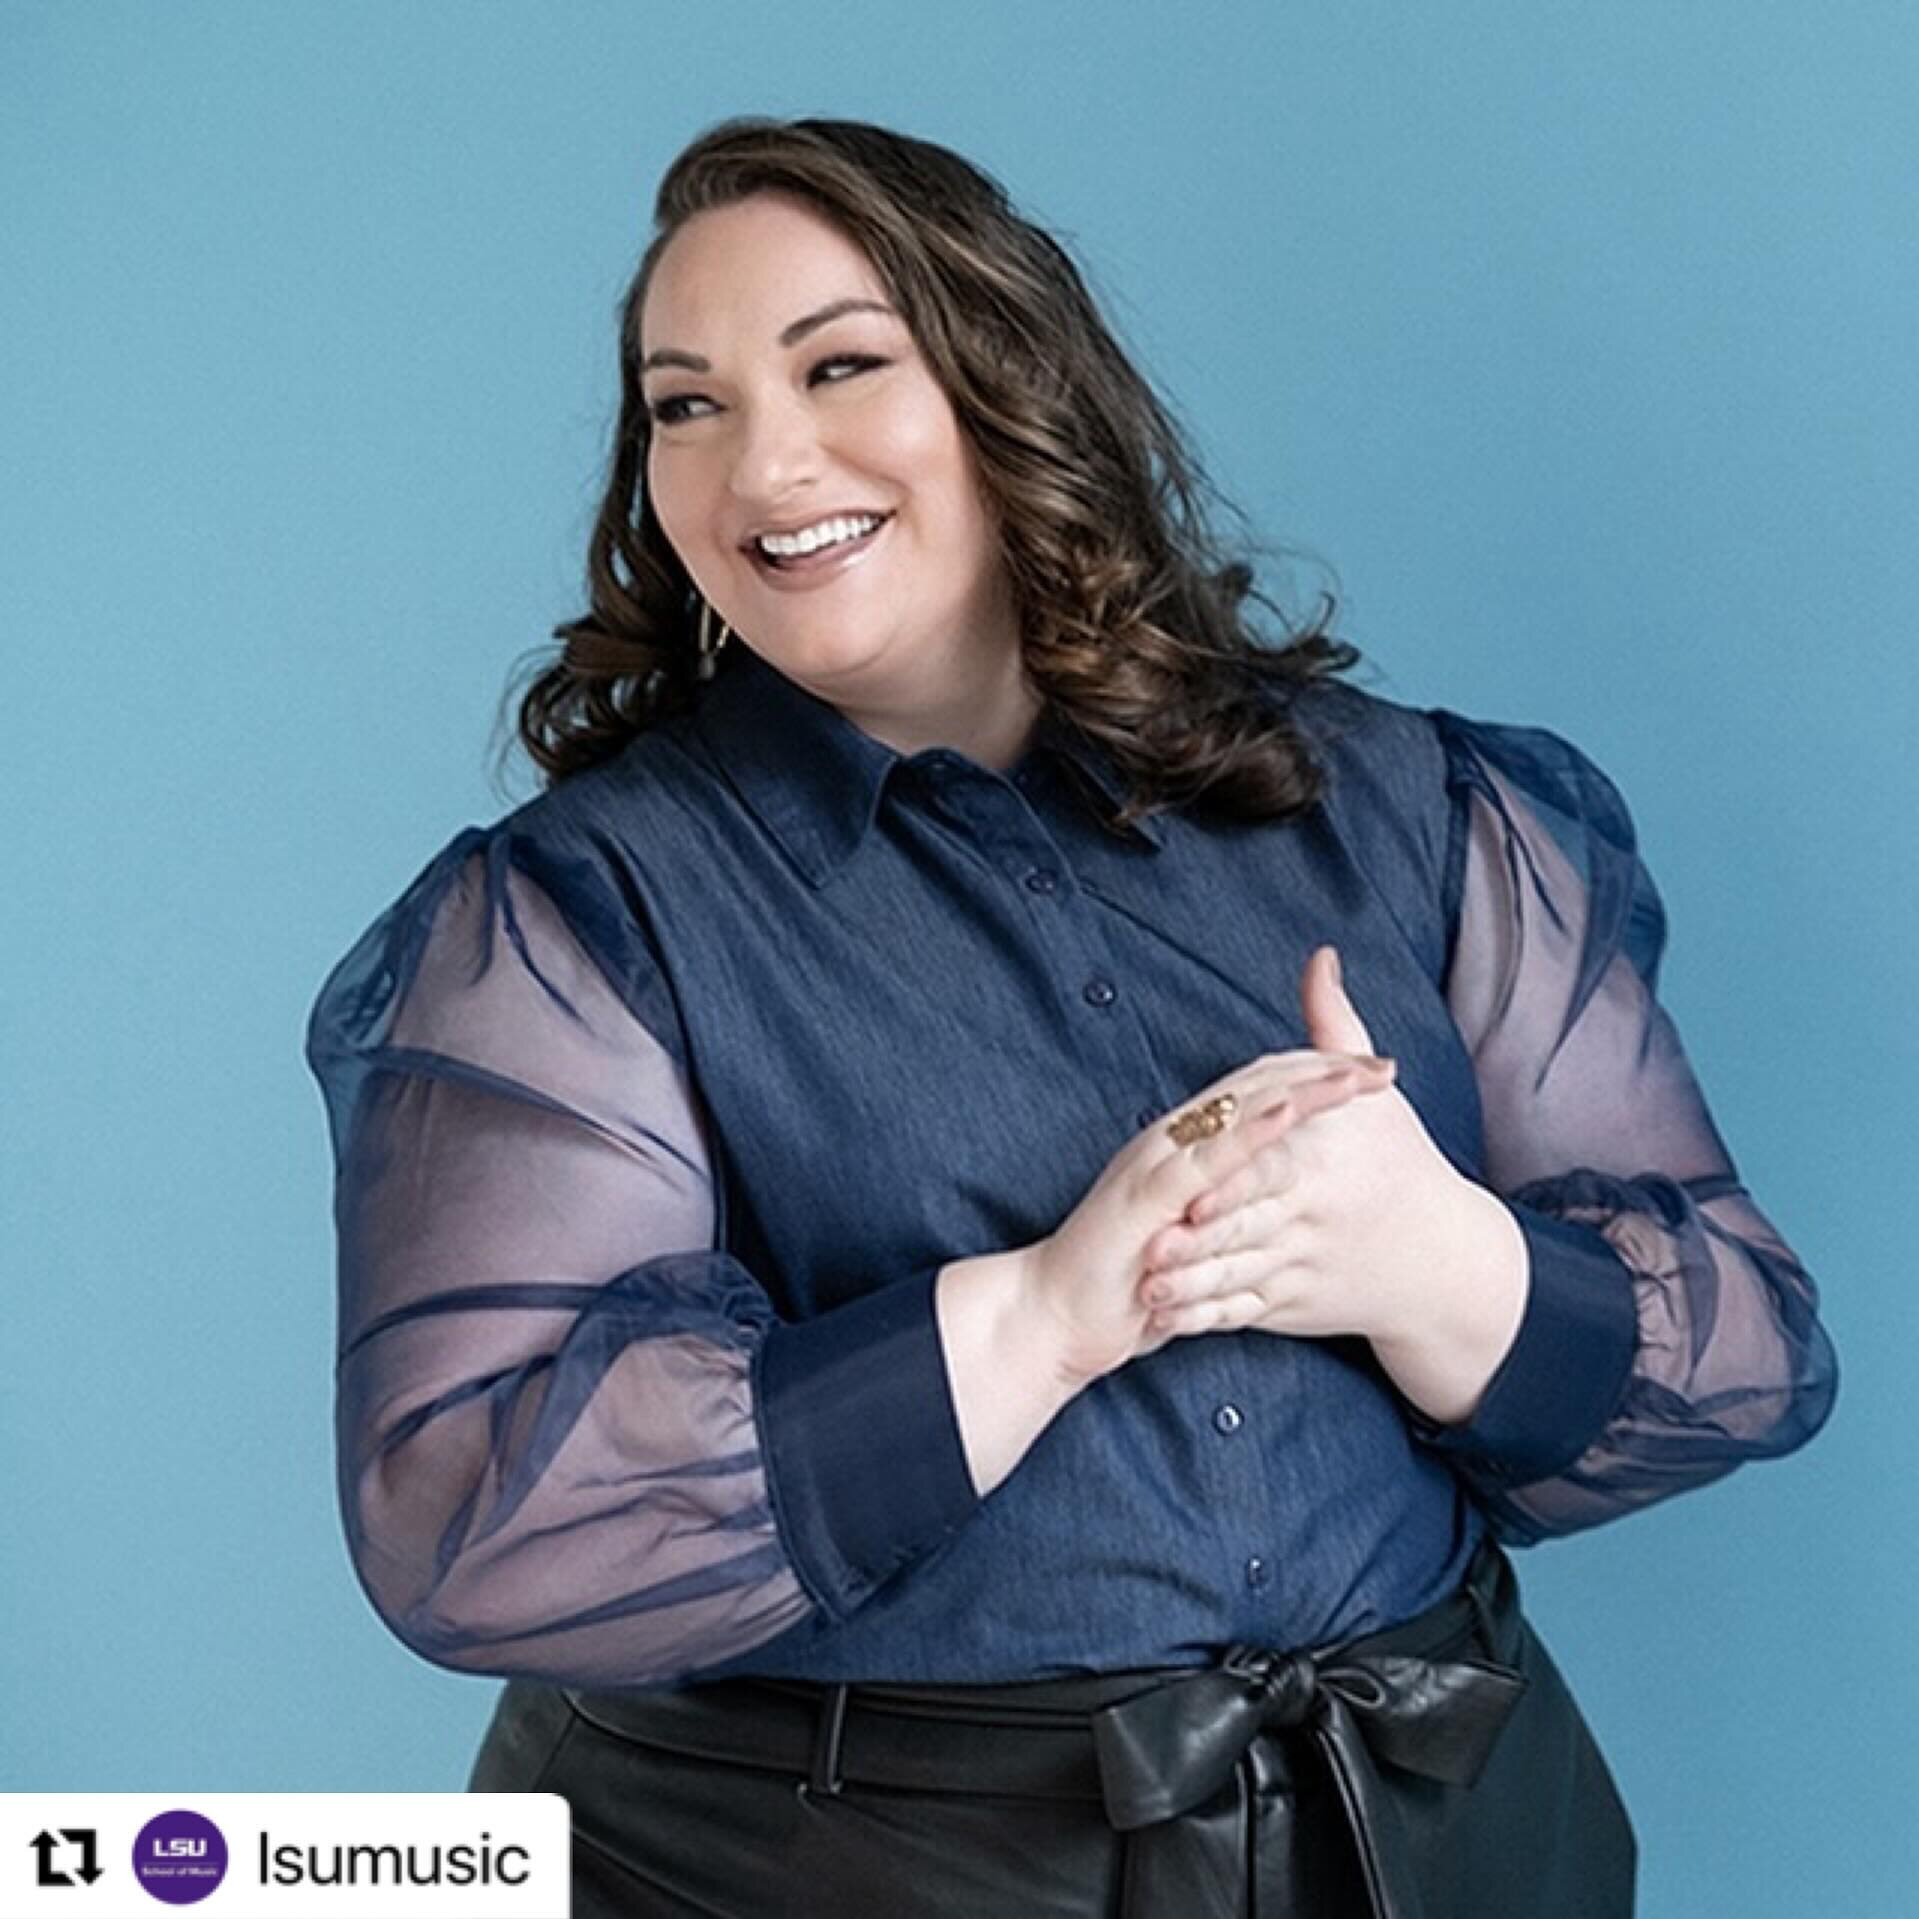 SURPRISE! Thrilled to be joining the faculty at @lsu 💜🐯

#Repost @lsumusic @lsu.opera 
・・・
Join us in welcoming acclaimed mezzo-soprano Lindsay Kate Brown to LSU as Assistant Professor of Voice!
 
Brown is a rising opera star praised for her rich, 